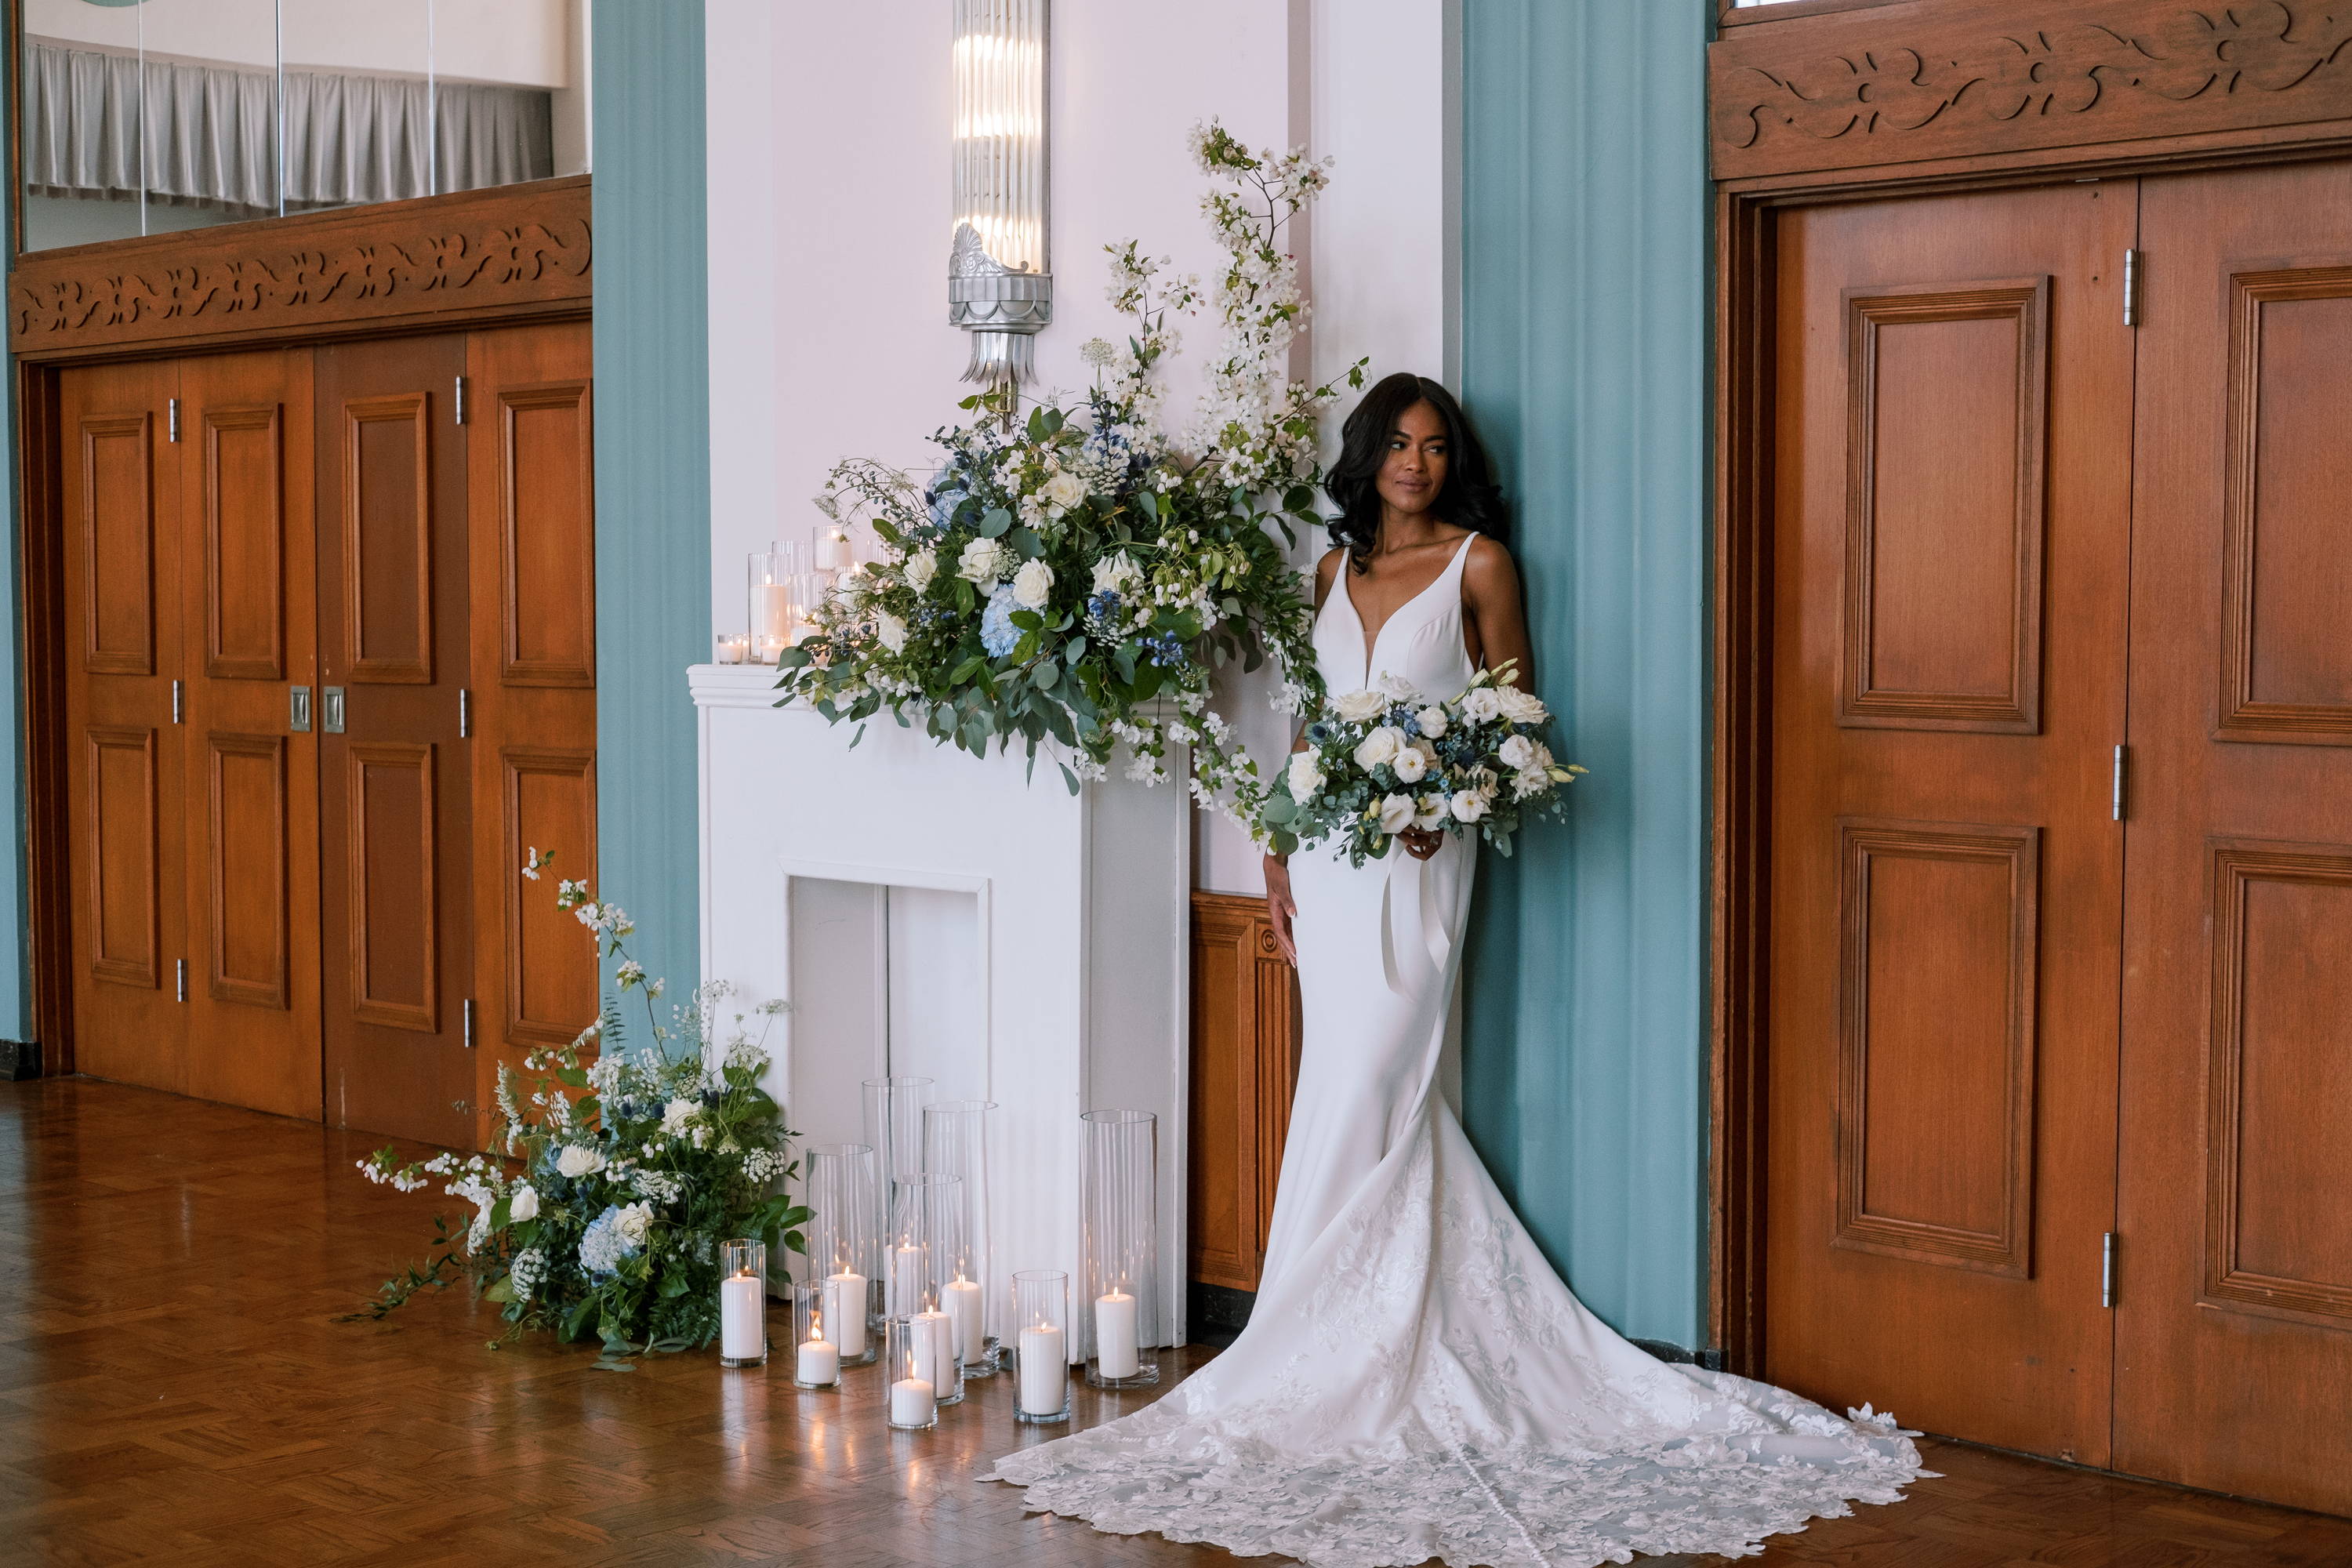 How to Get Blue and Cream wedding flowers on a budget